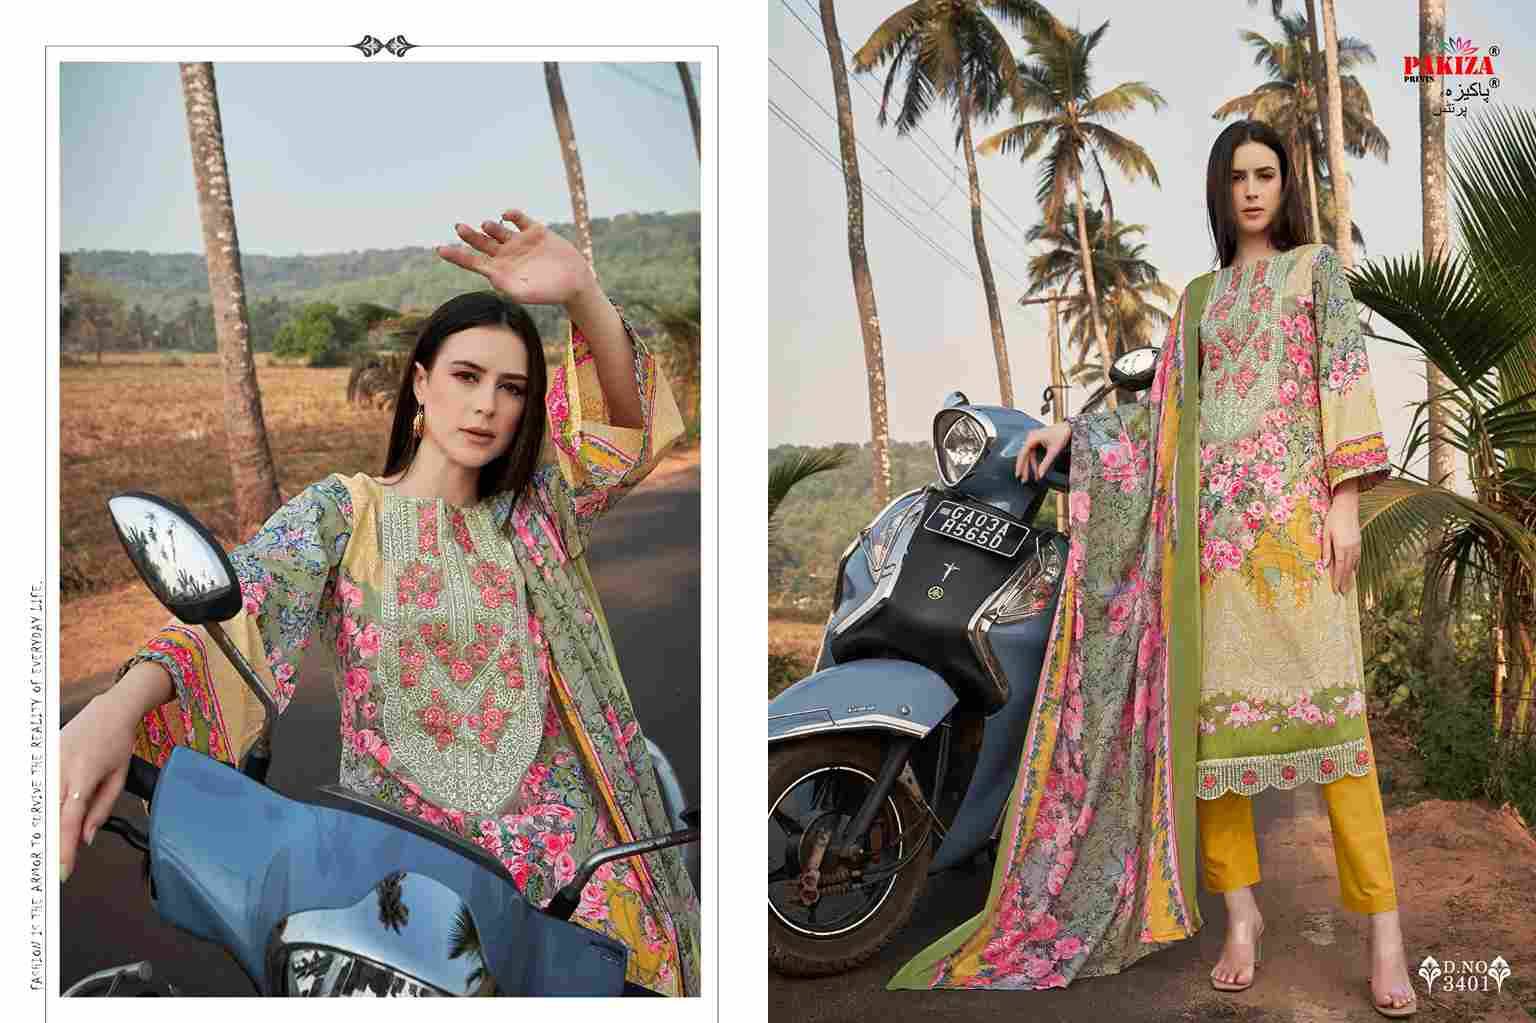 Haniya Hiba Vol-34 By Pakiza Prints 3401 To 3410 Series Beautiful Festive Suits Stylish Fancy Colorful Party Wear & Occasional Wear Lawn Dresses At Wholesale Price